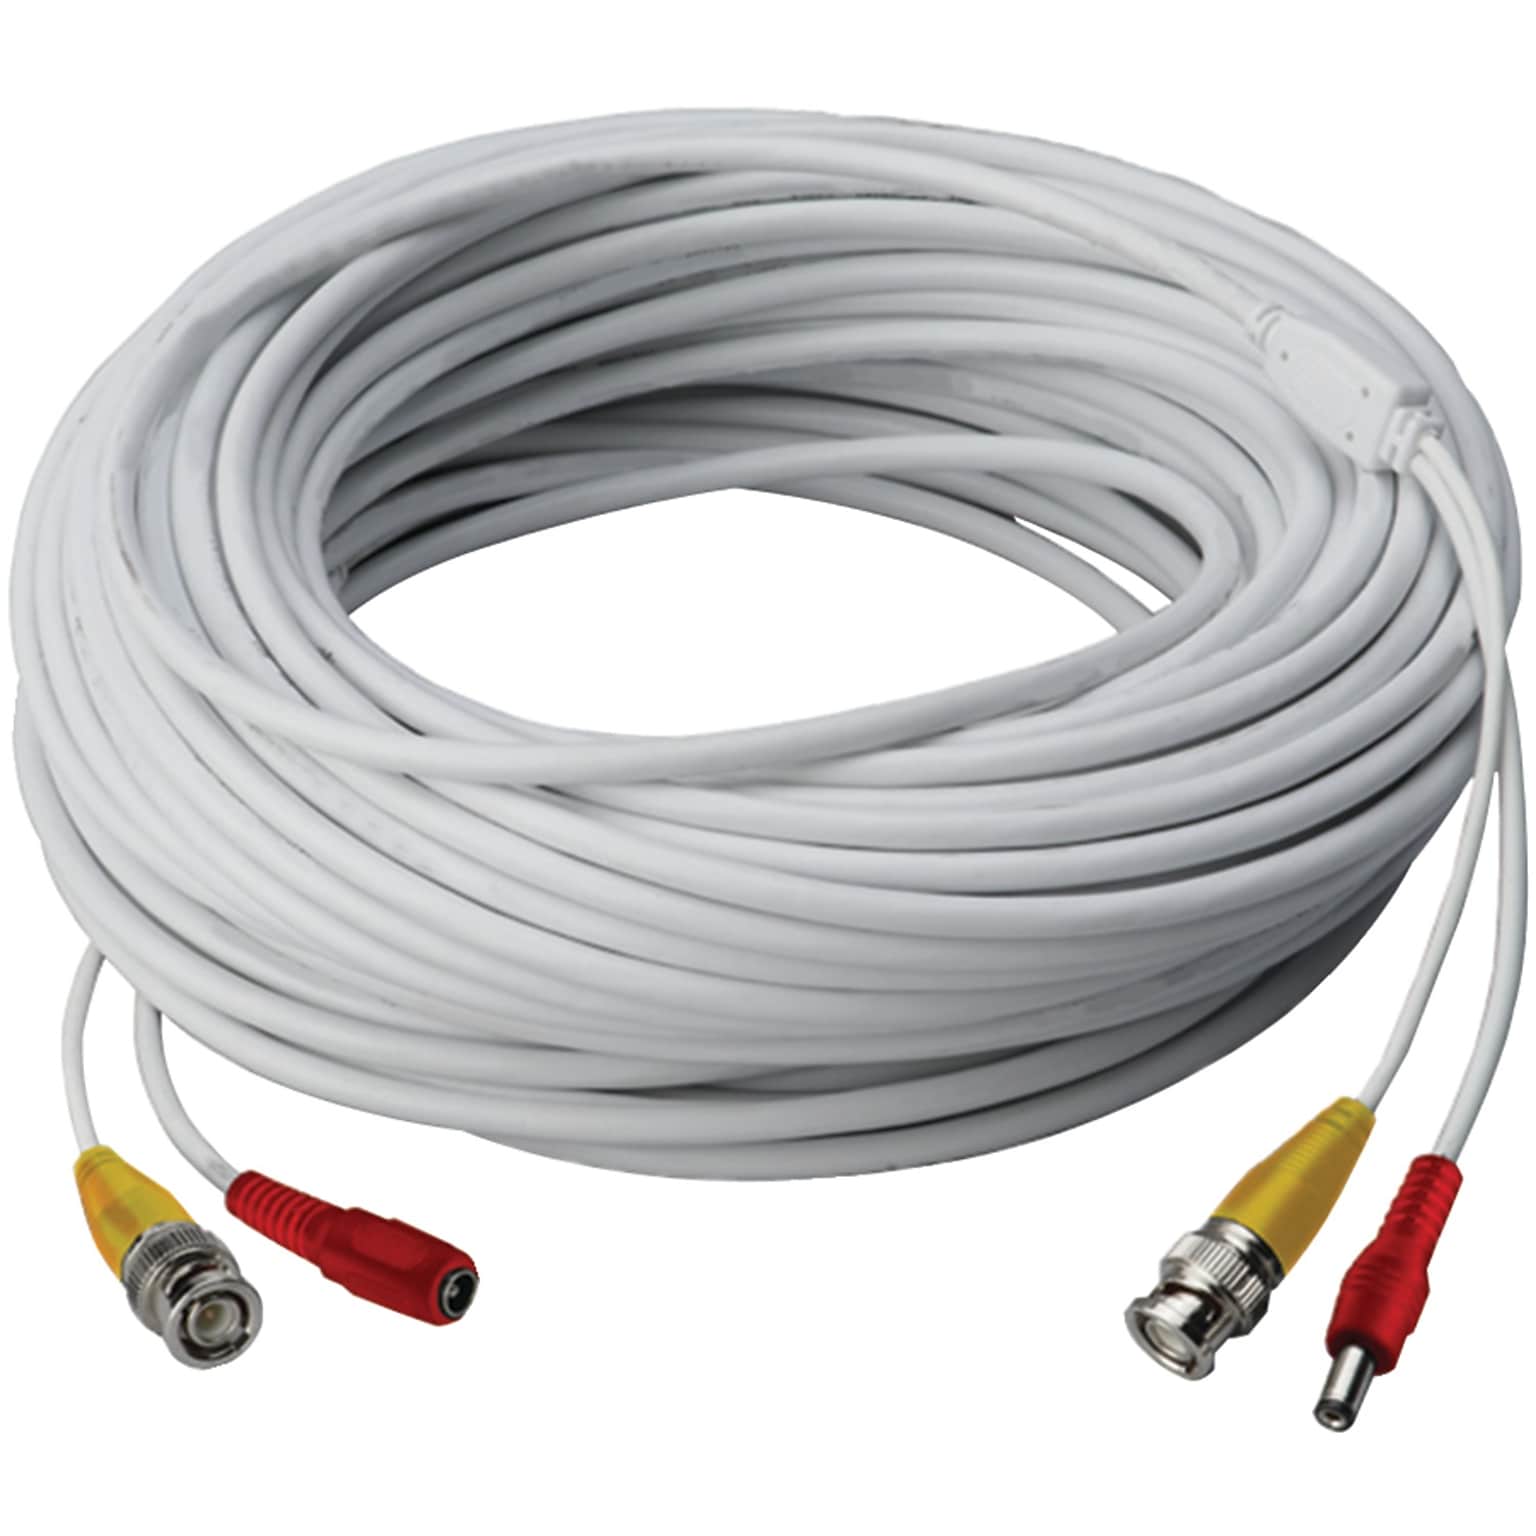 Lorex 60 Coax to Rg59 Video Cable, White (LORCB60URBDS)